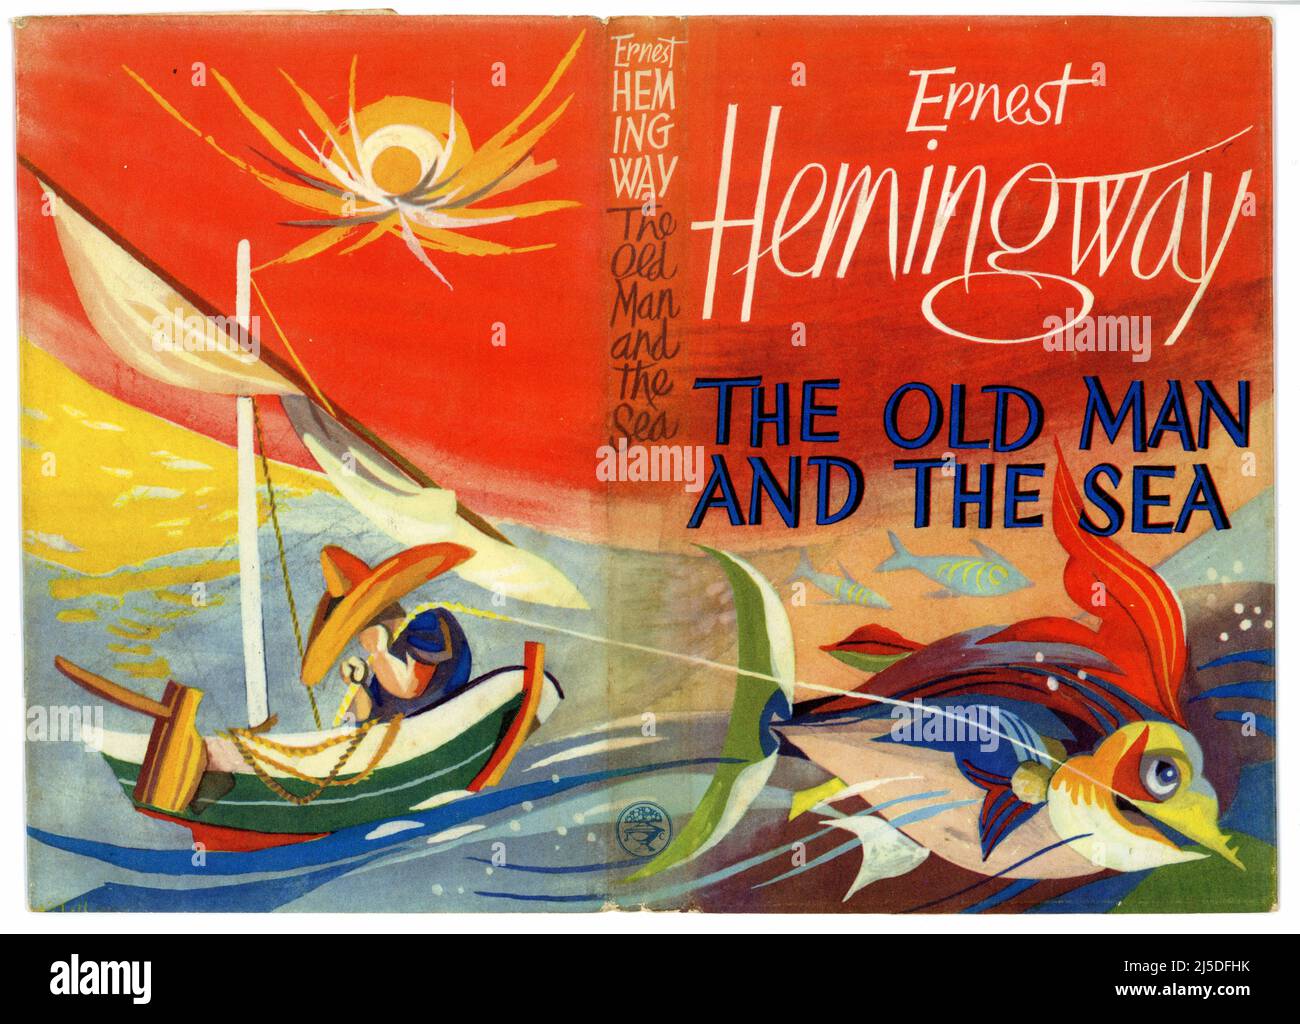 Wonderful original retro / mid-century Illustrated book cover of 'The Old Man and the Sea', published in 1952 written by famous American author, Ernest Hemingway. First British publication. Stock Photo